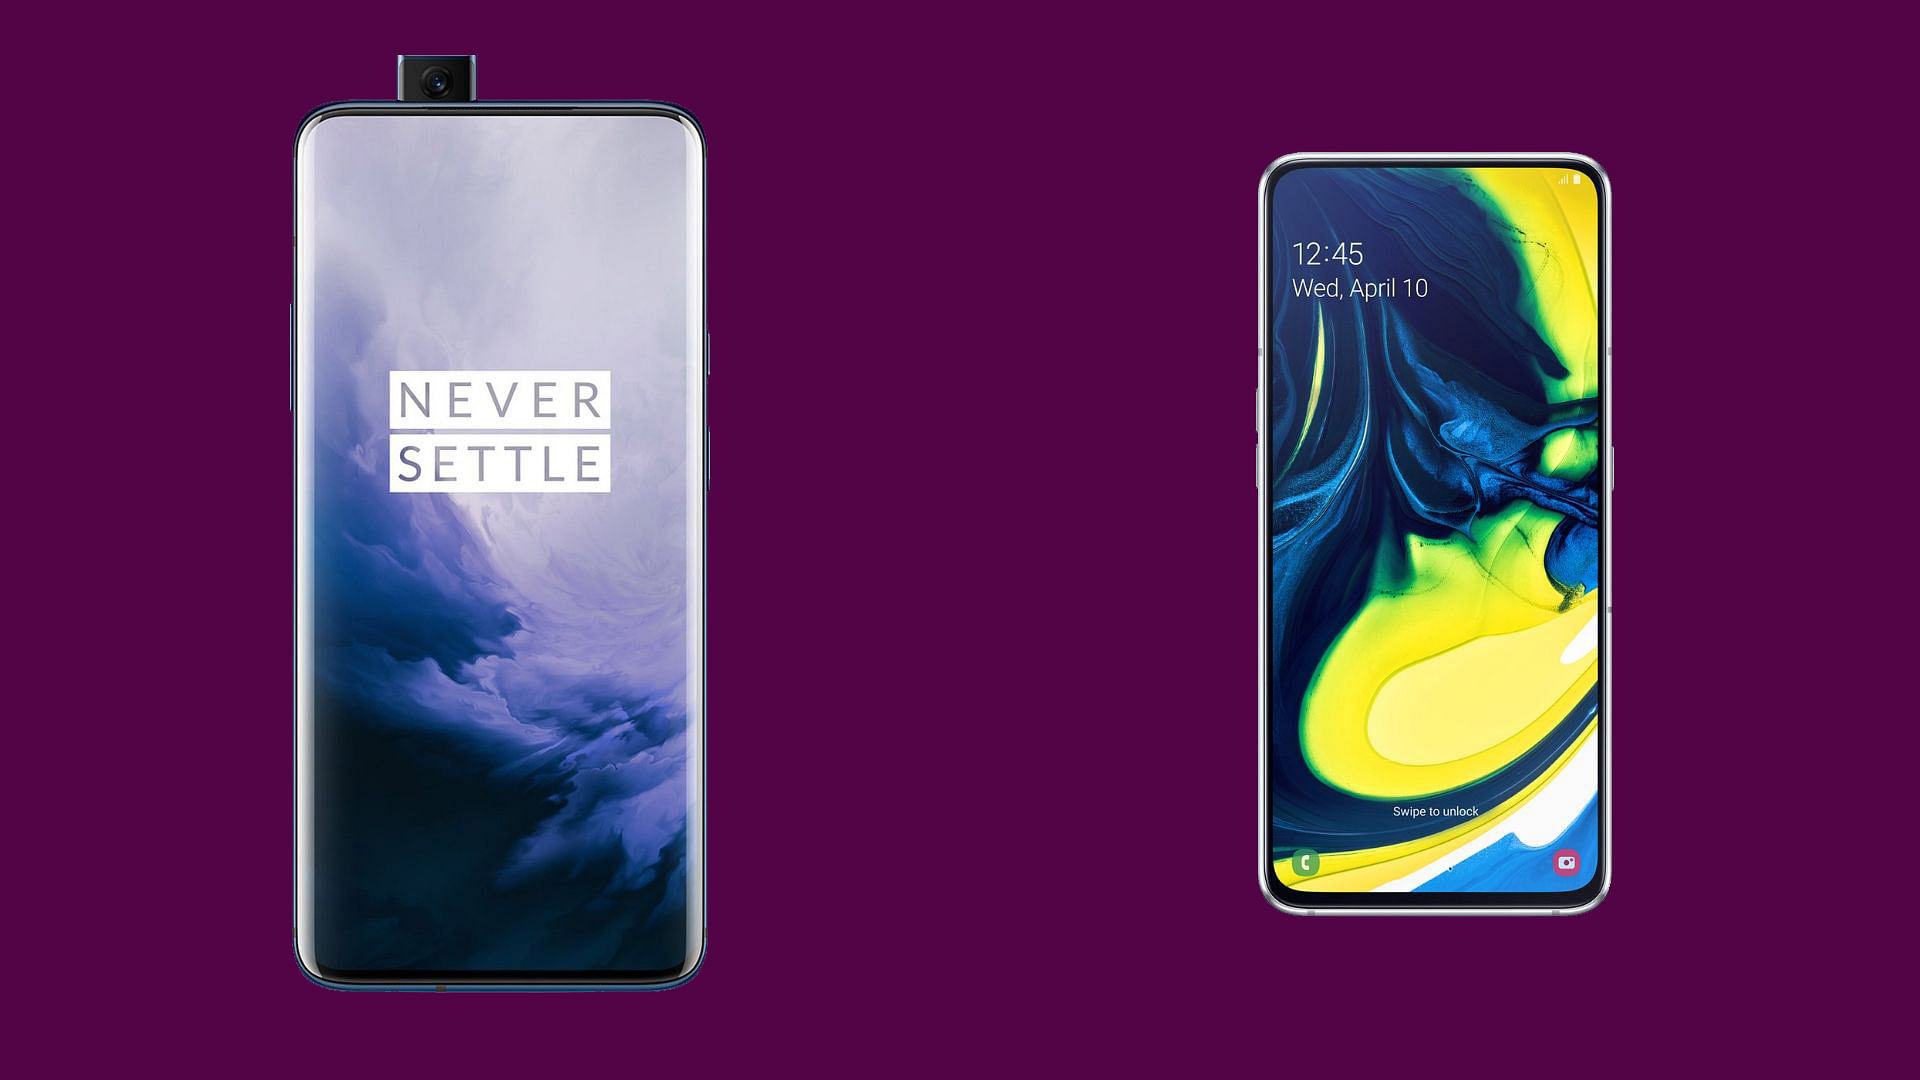 OnePlus 7 Pro (left) or Samsung Galaxy A80 (right)